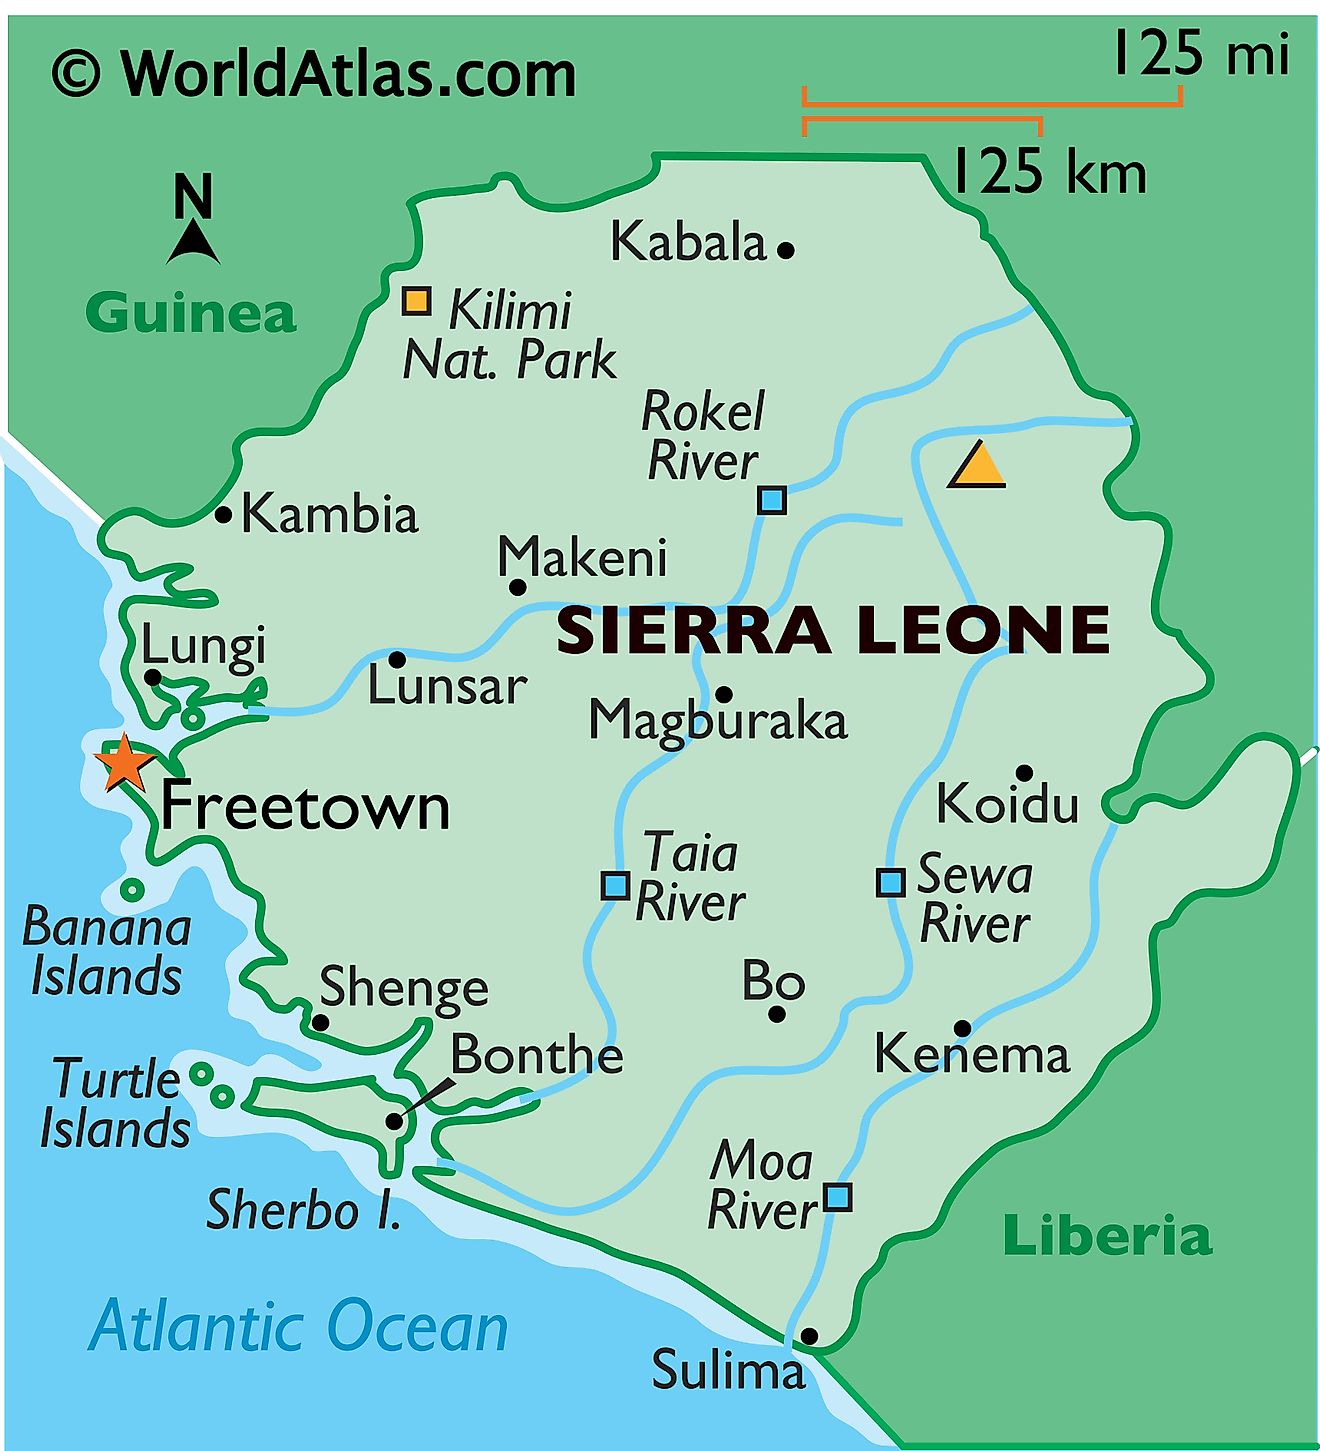 Phyiscal Map of Sierra Leone with state boundaries. It shows the physical features of Sierra Leone including relief, rivers, islands, highest point, and major cities.